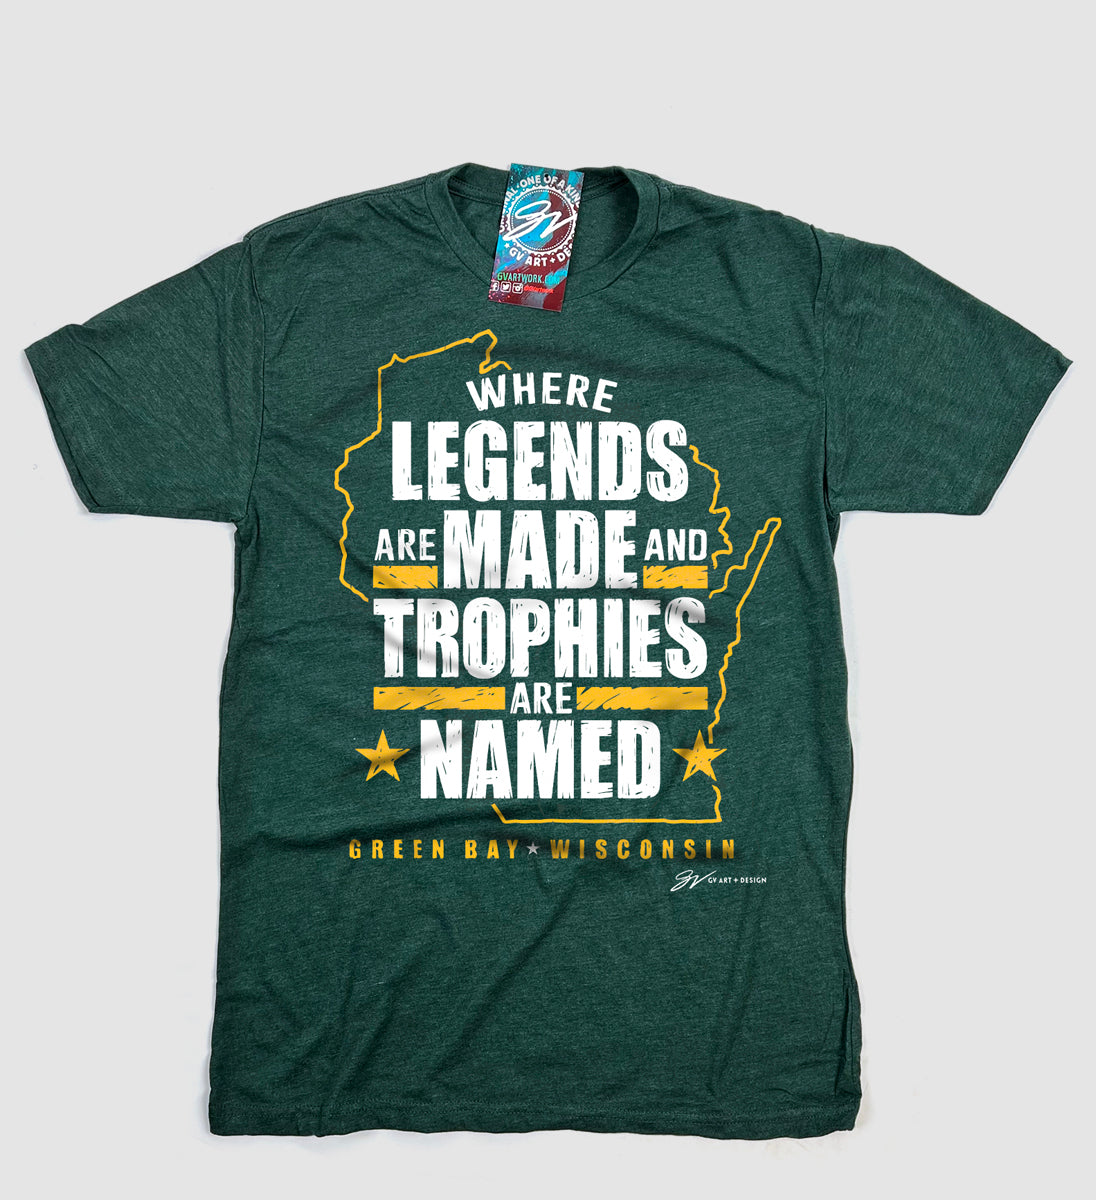 Green Bay Where Legends Are Made and Trophies Are Named T shirt